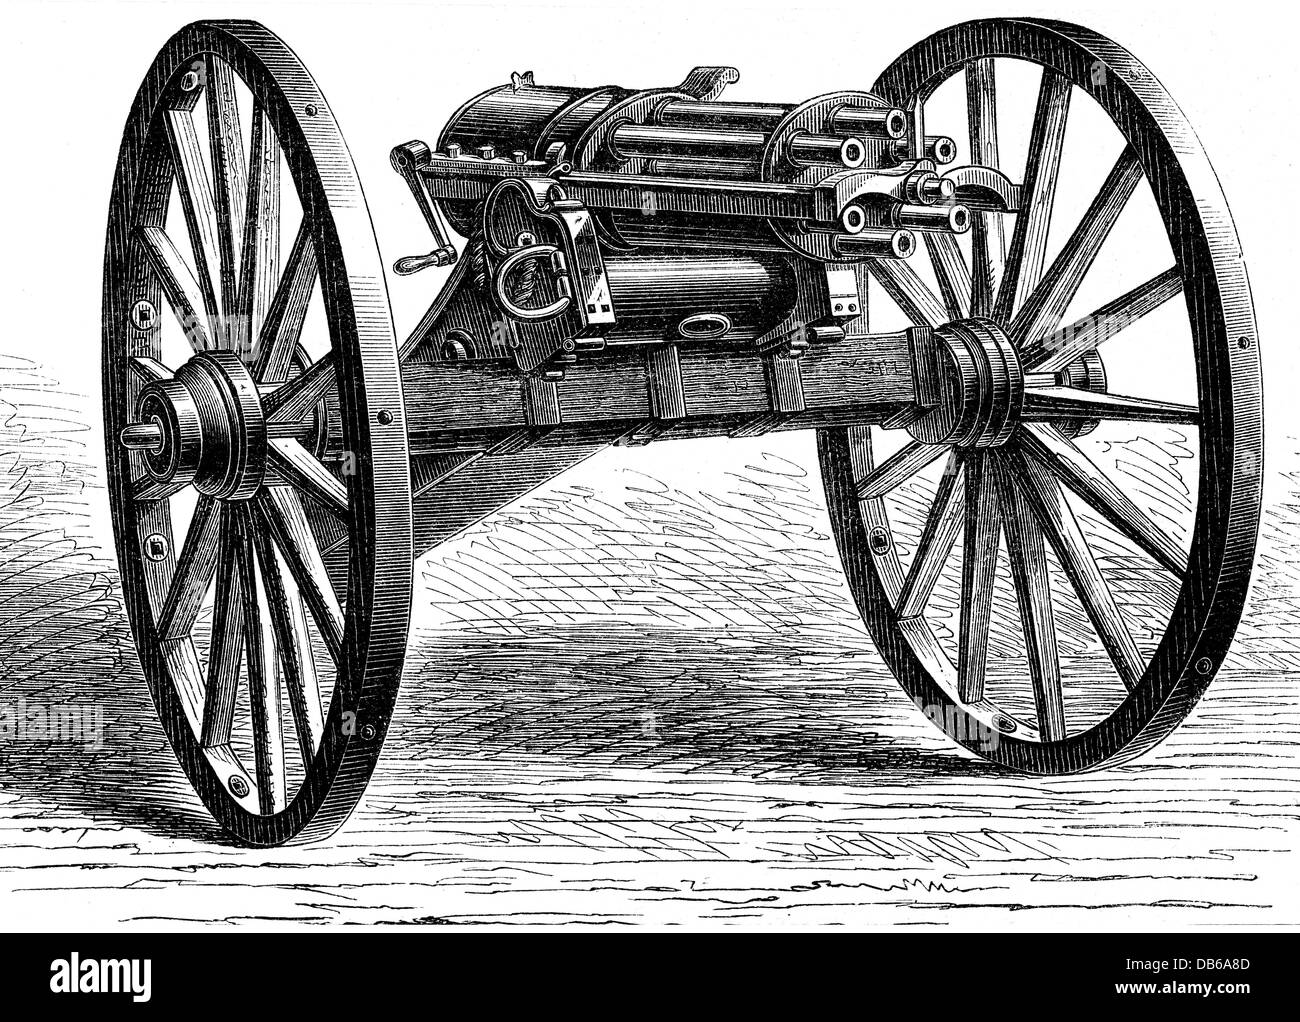 military, USA, weapons / arms, Gatling gun, designed in 1861, Additional-Rights-Clearences-Not Available Stock Photo